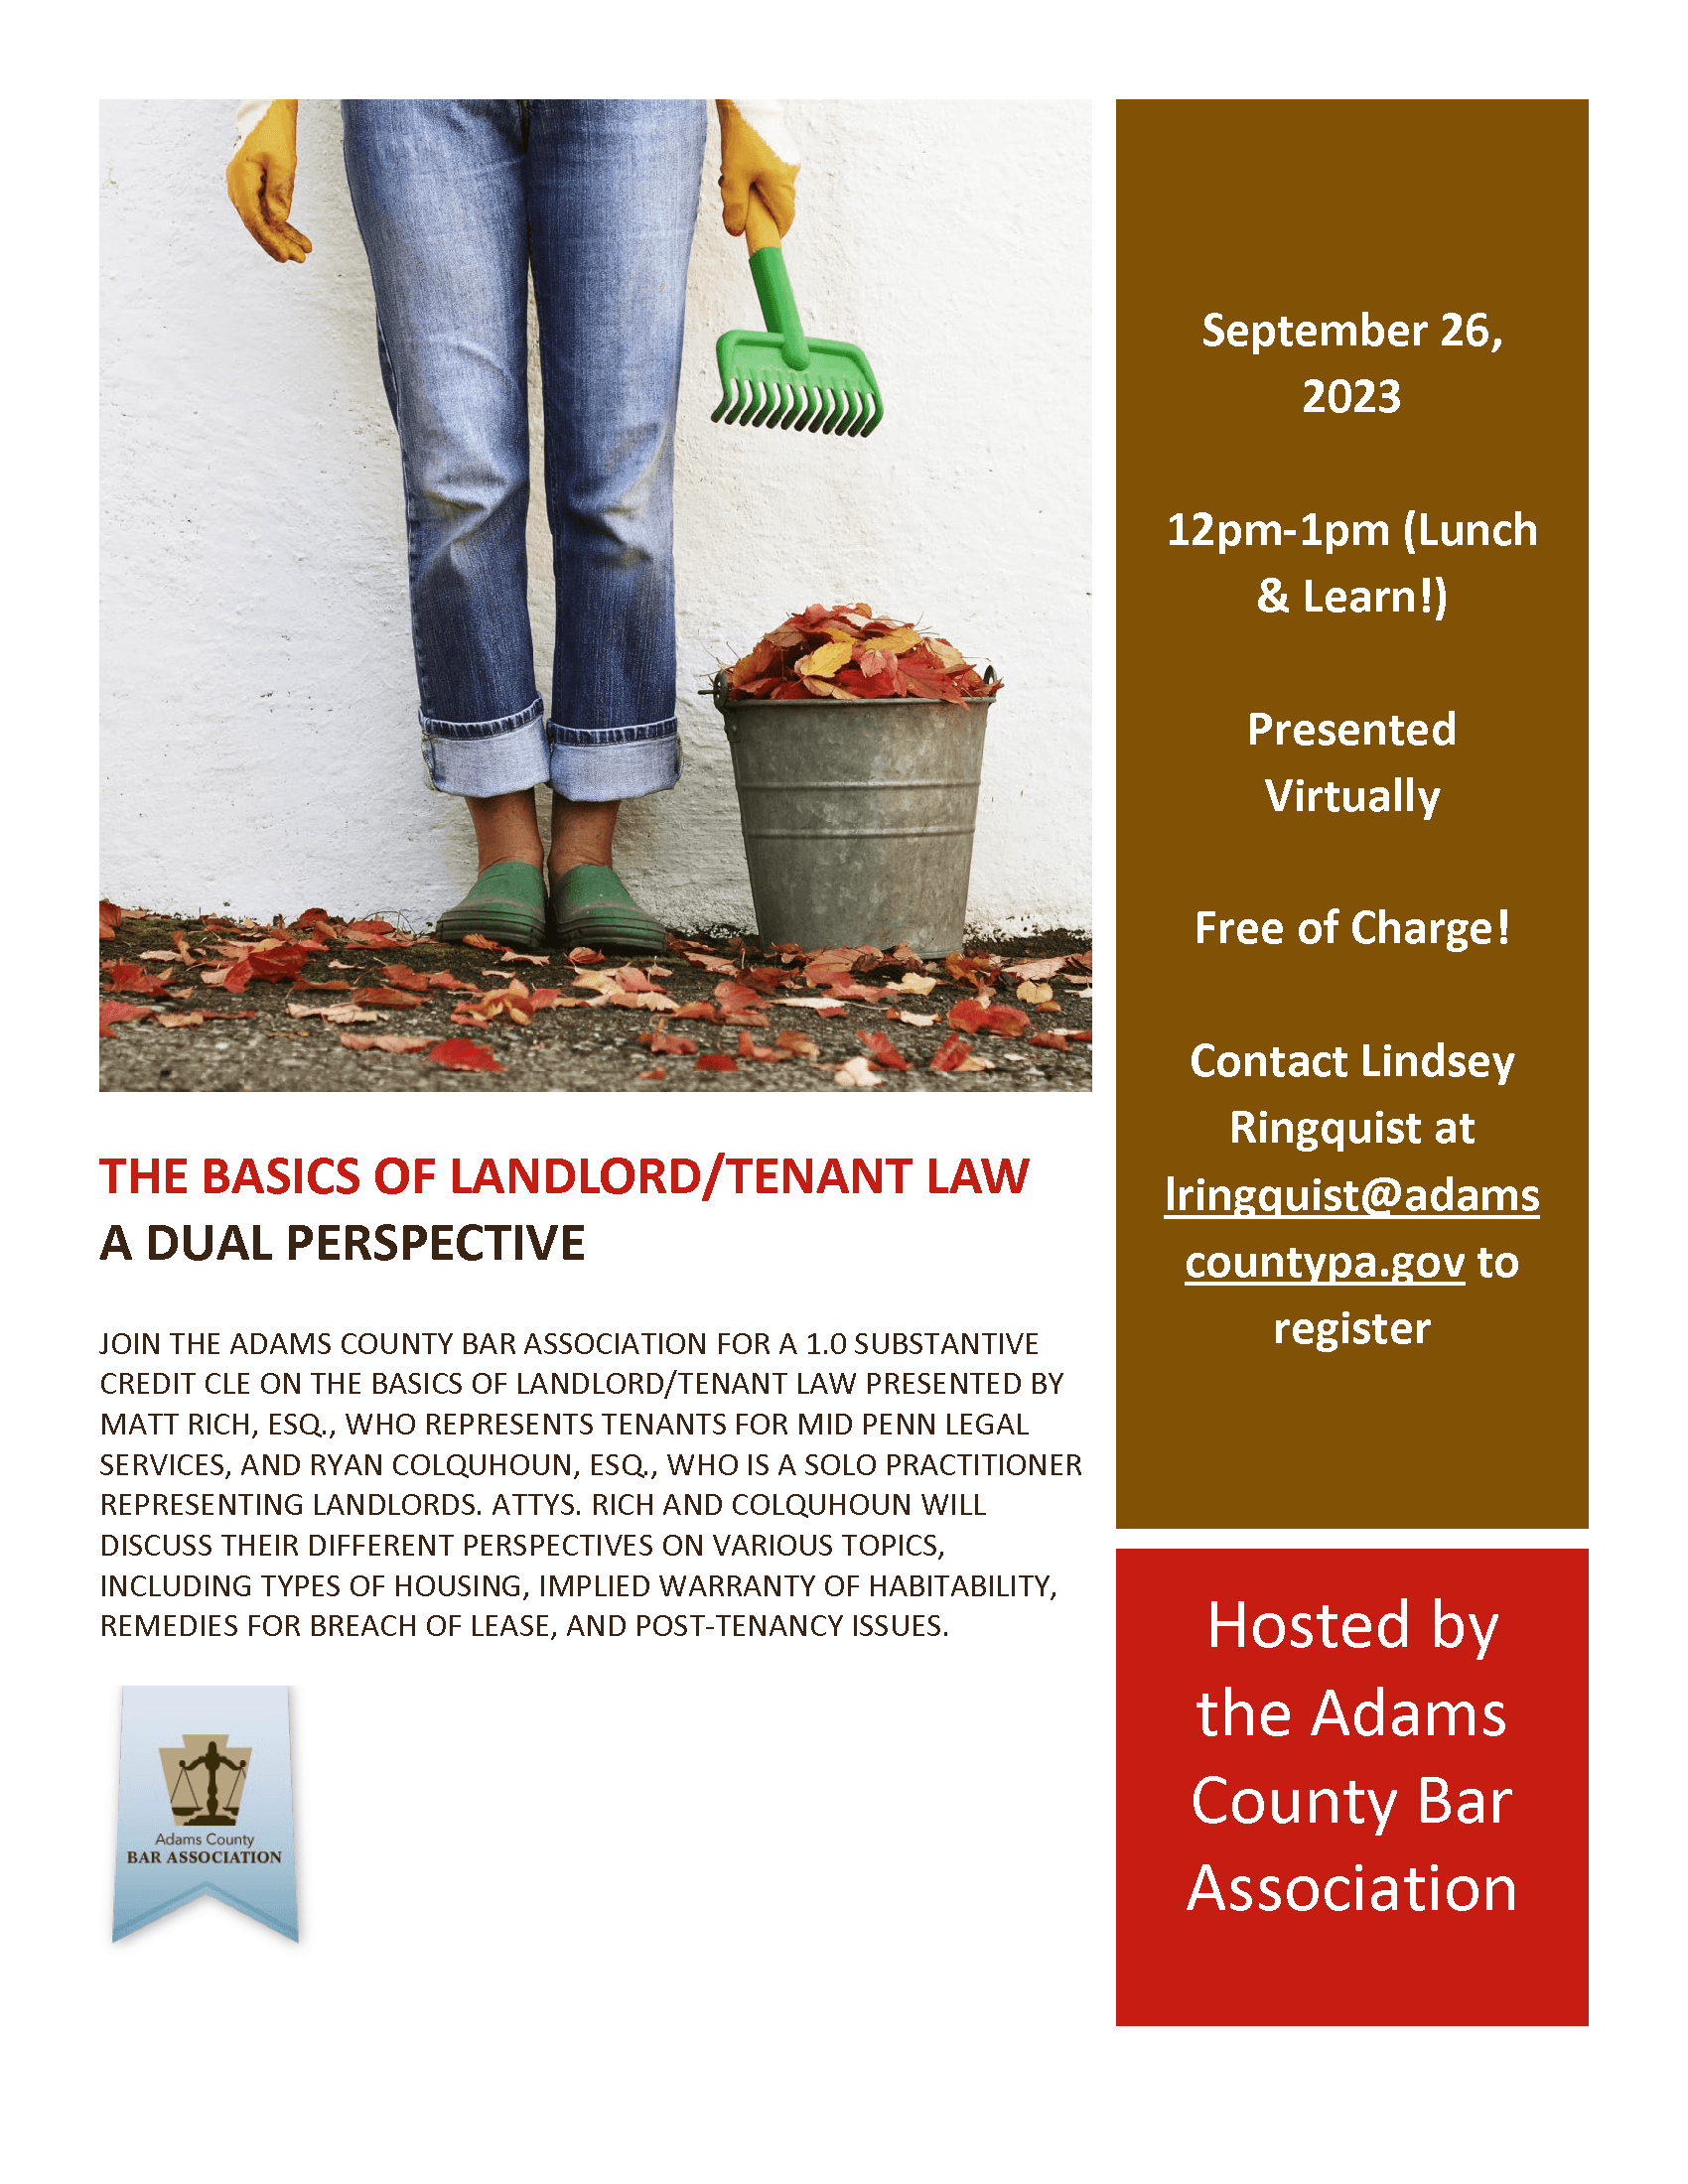 Flyer The Basics of Landlord/Tenant Law a virtual Community Legal Education training. 1 substantive credit email lringquist@adamscounty.gov to register